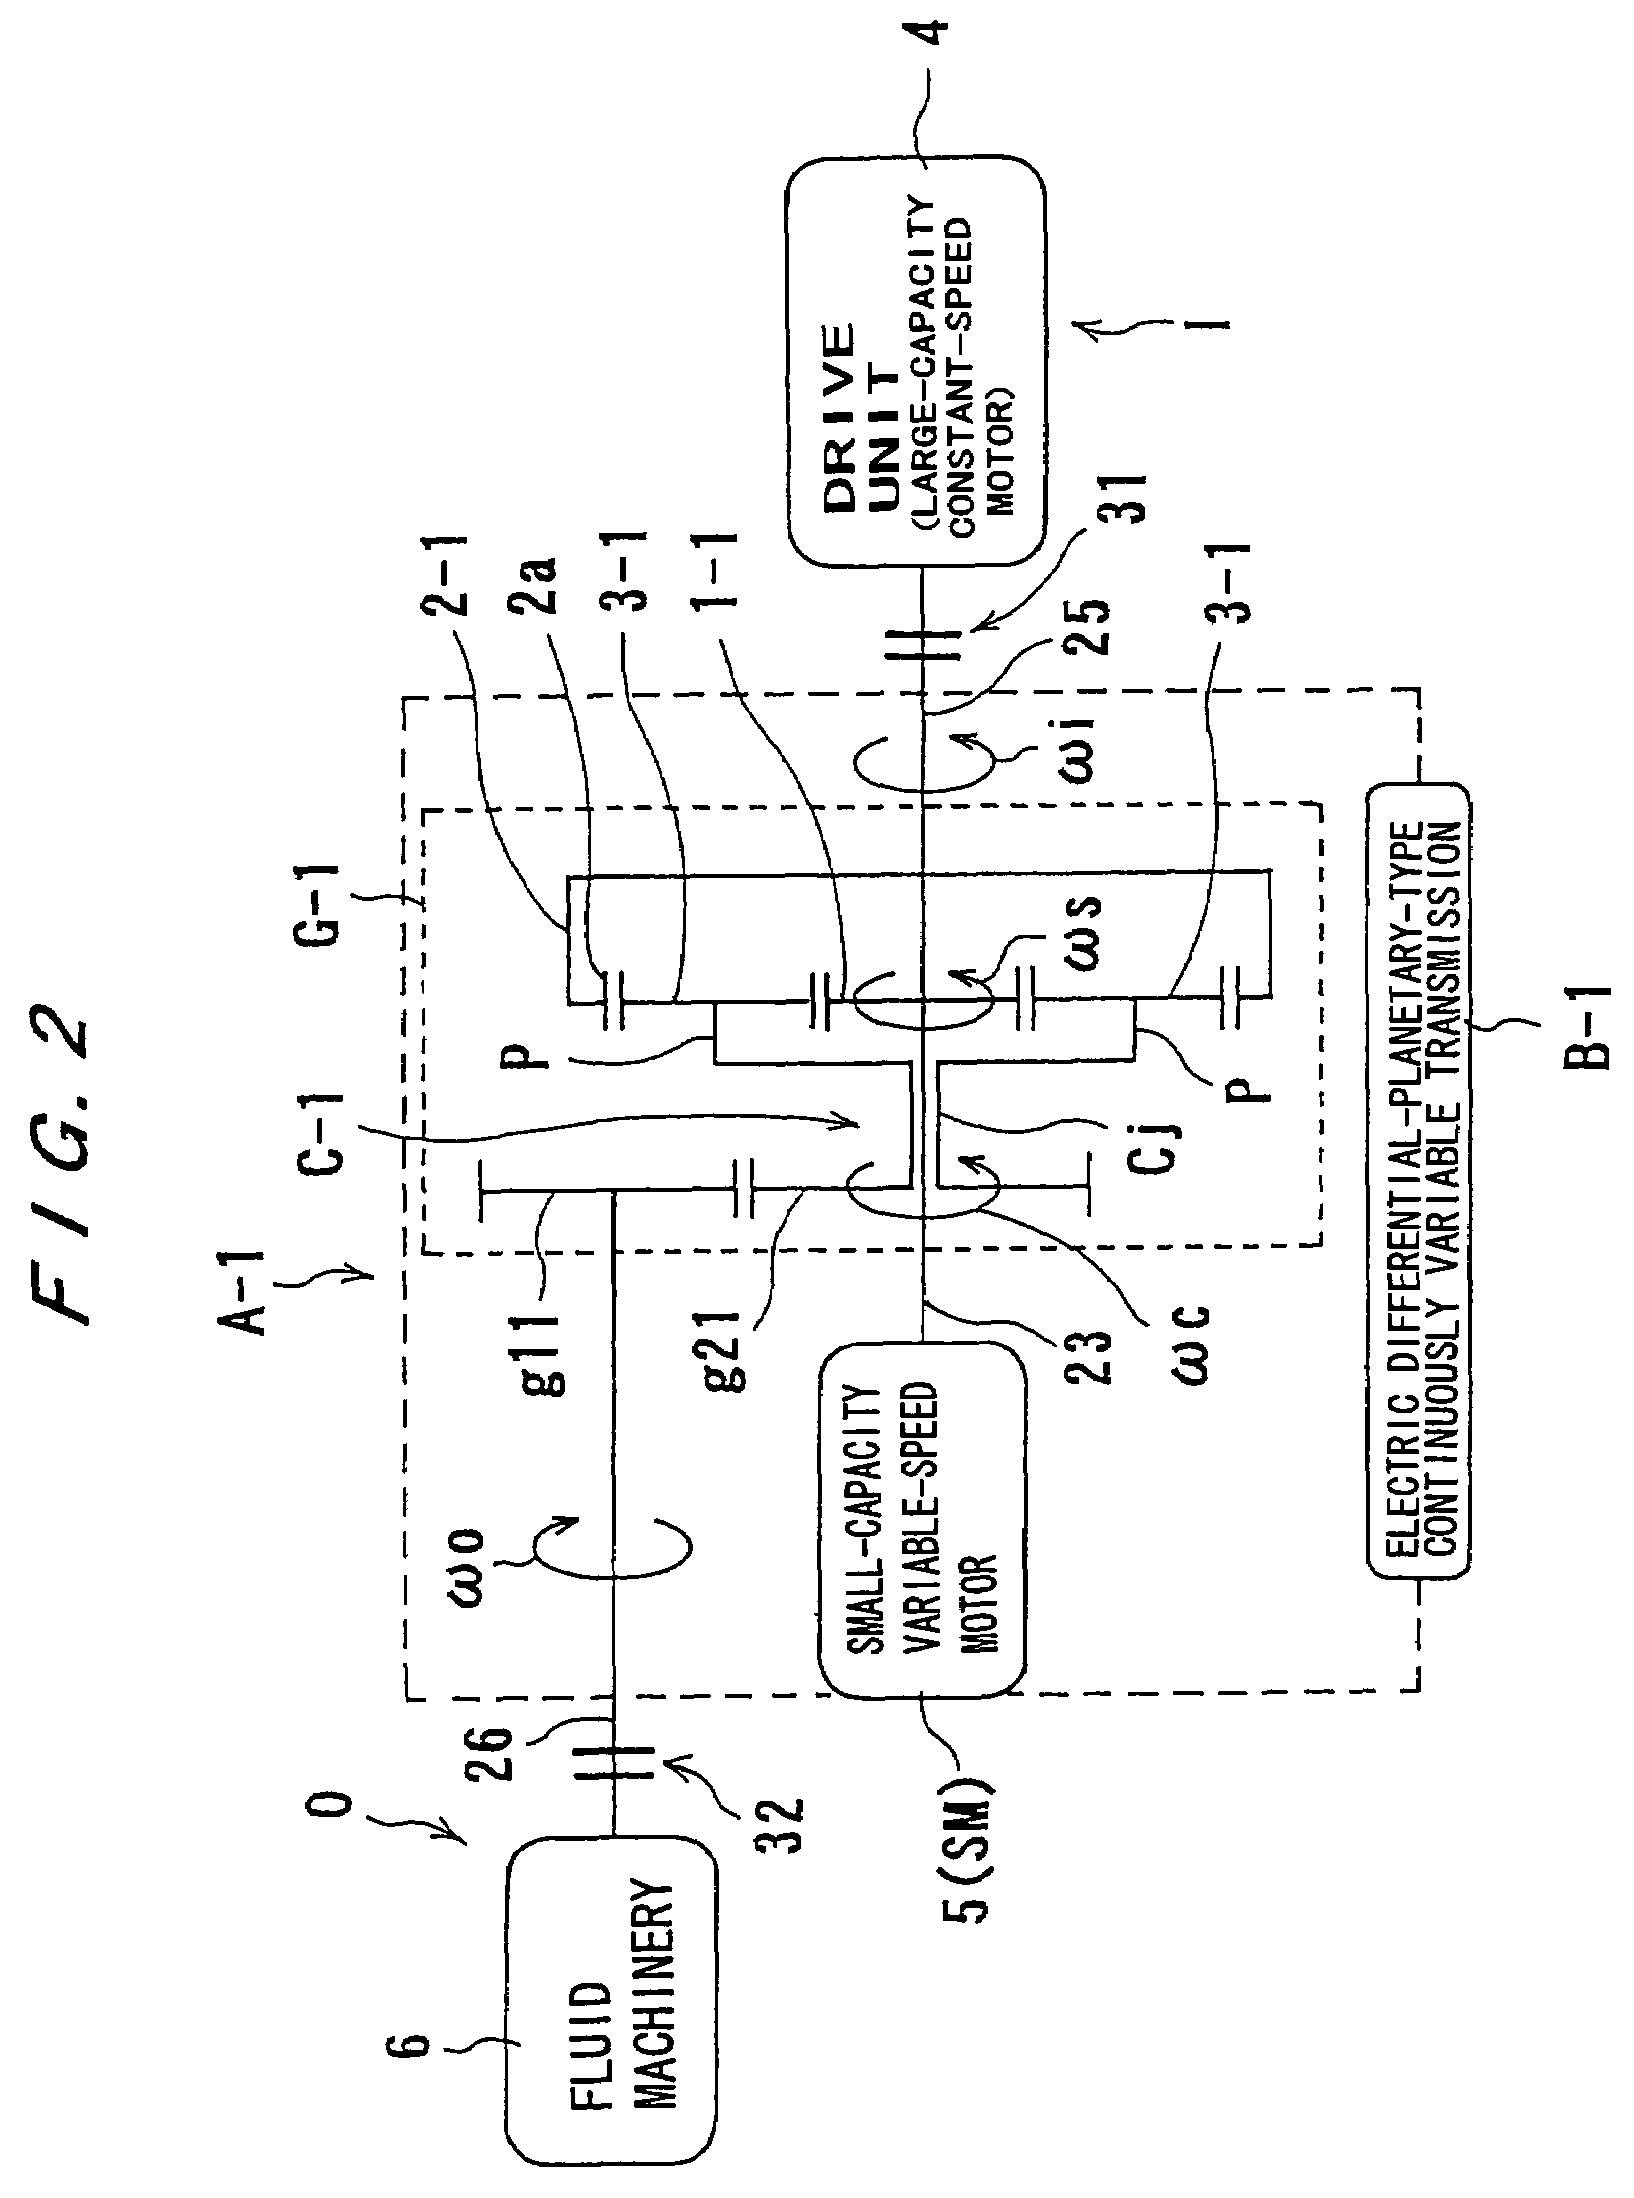 Differential planetary gear apparatus